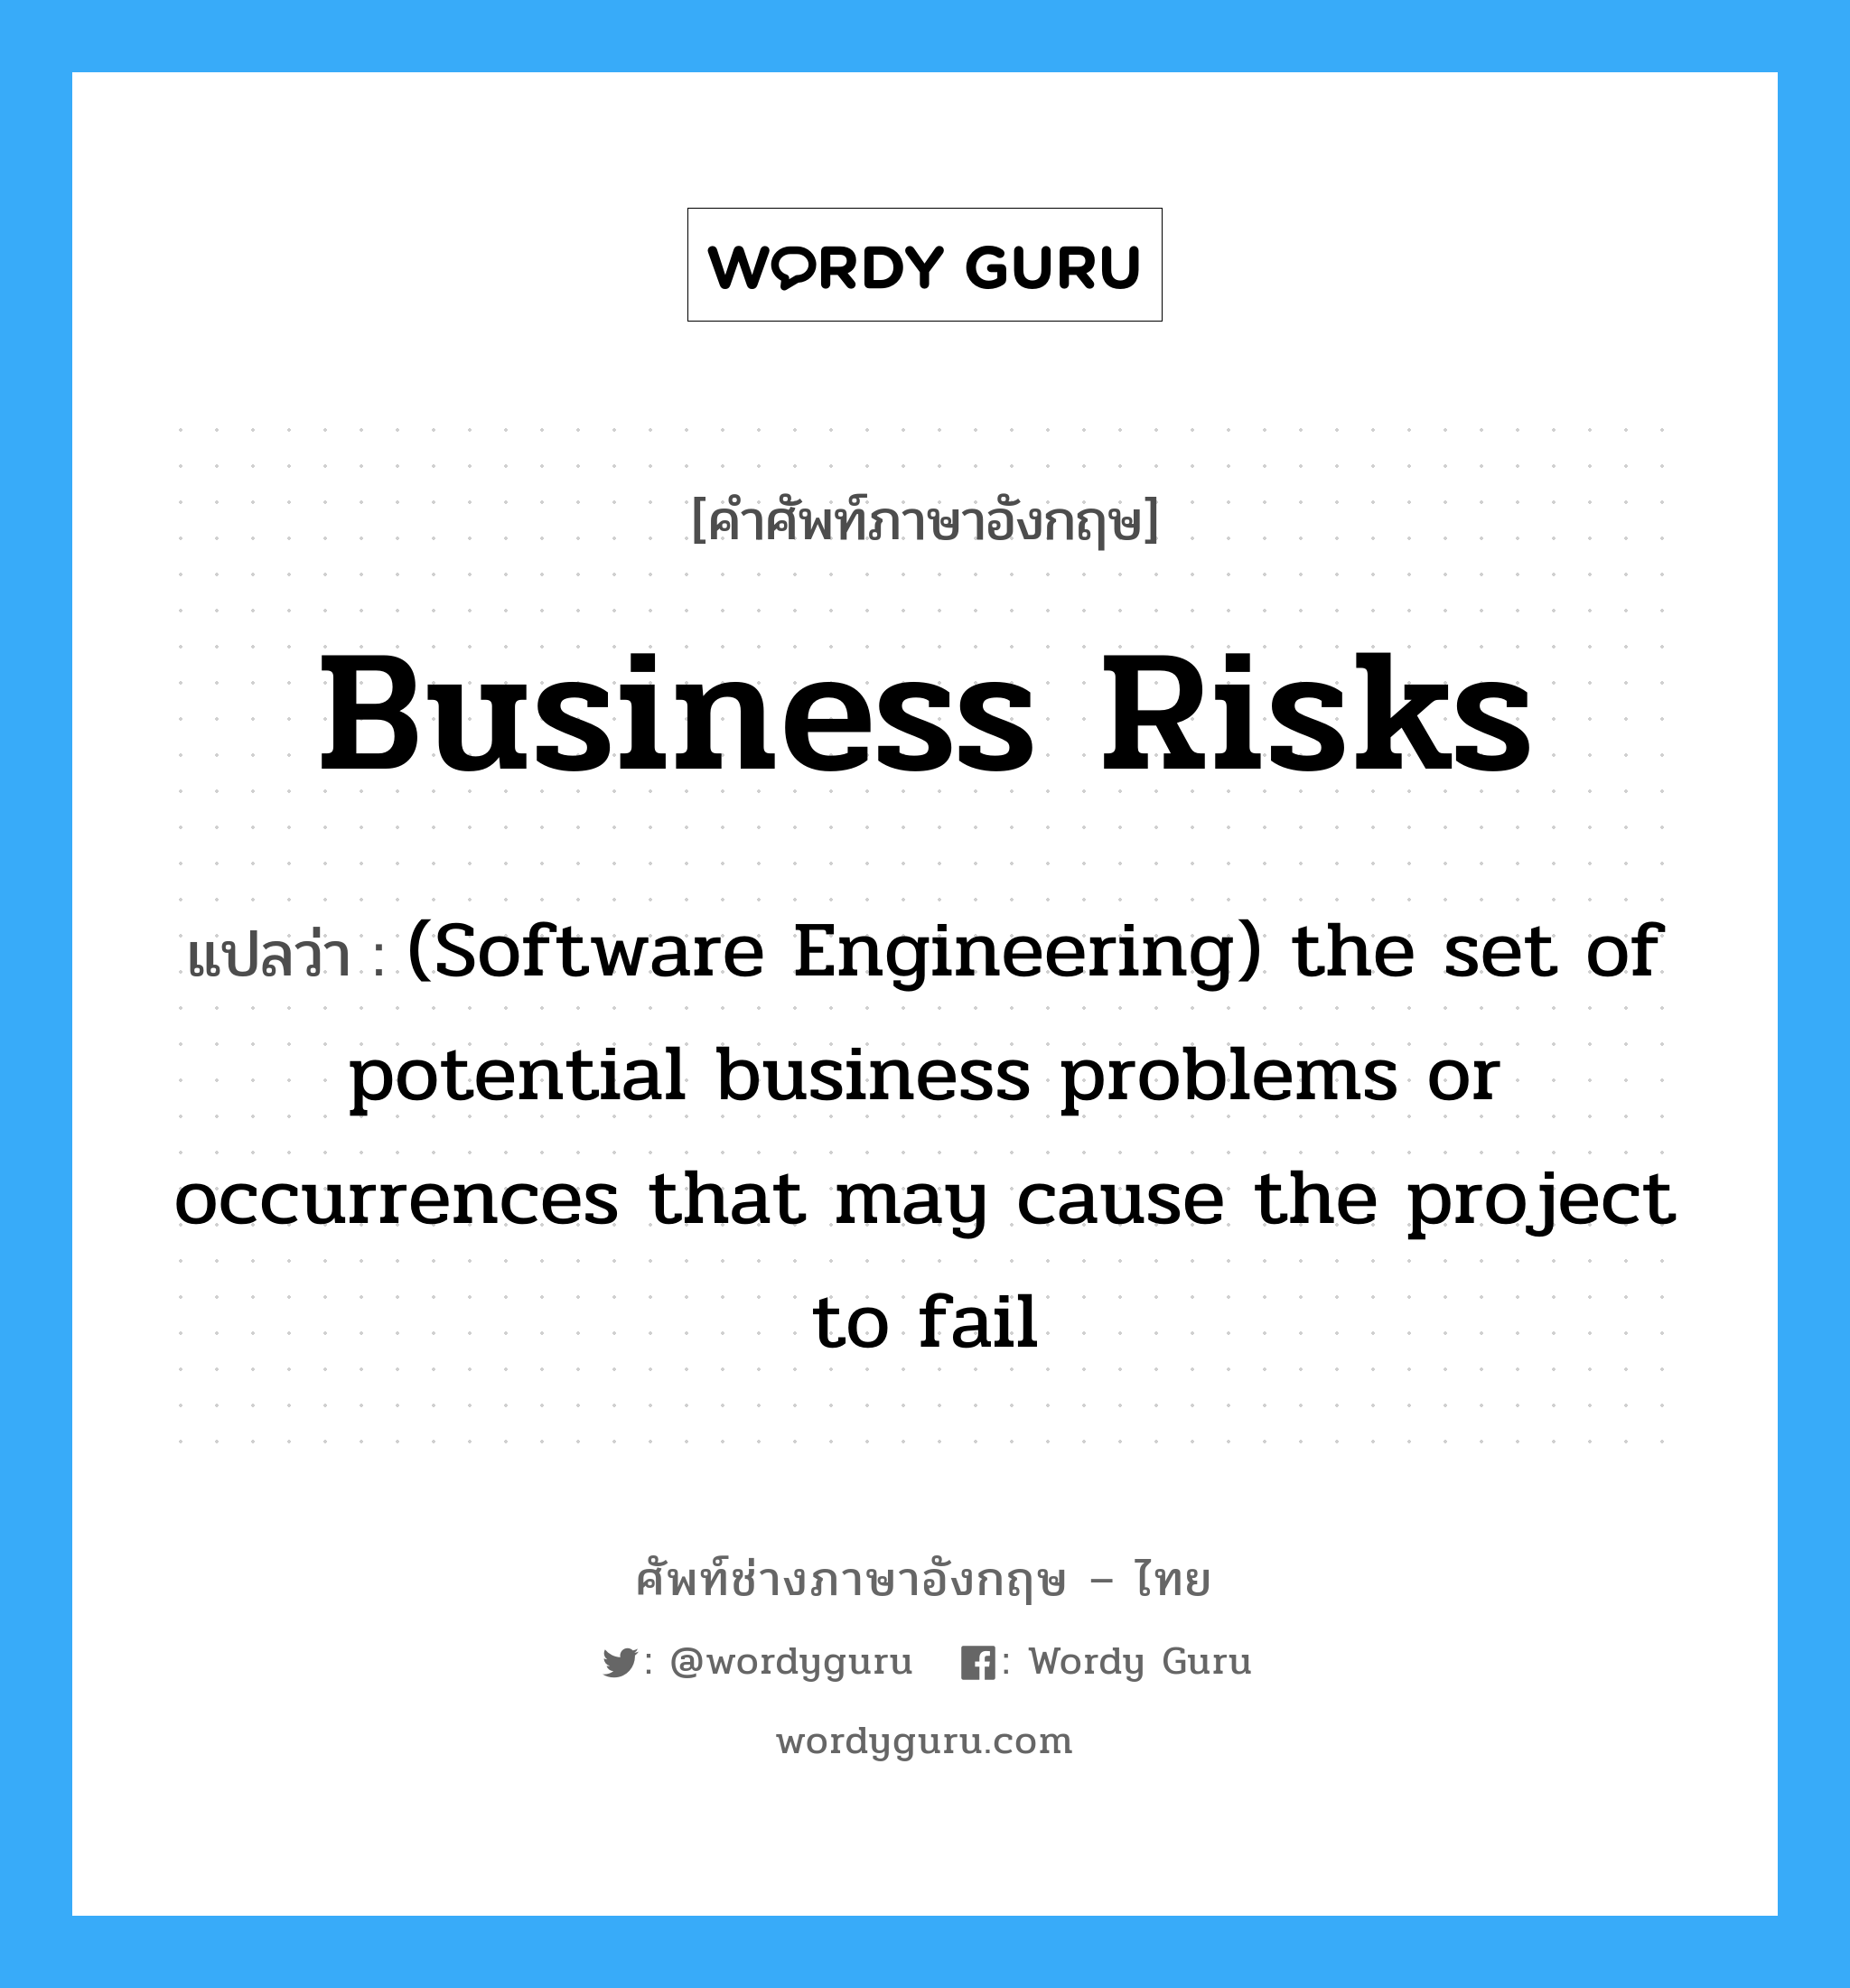 Business risks แปลว่า?, คำศัพท์ช่างภาษาอังกฤษ - ไทย Business risks คำศัพท์ภาษาอังกฤษ Business risks แปลว่า (Software Engineering) the set of potential business problems or occurrences that may cause the project to fail